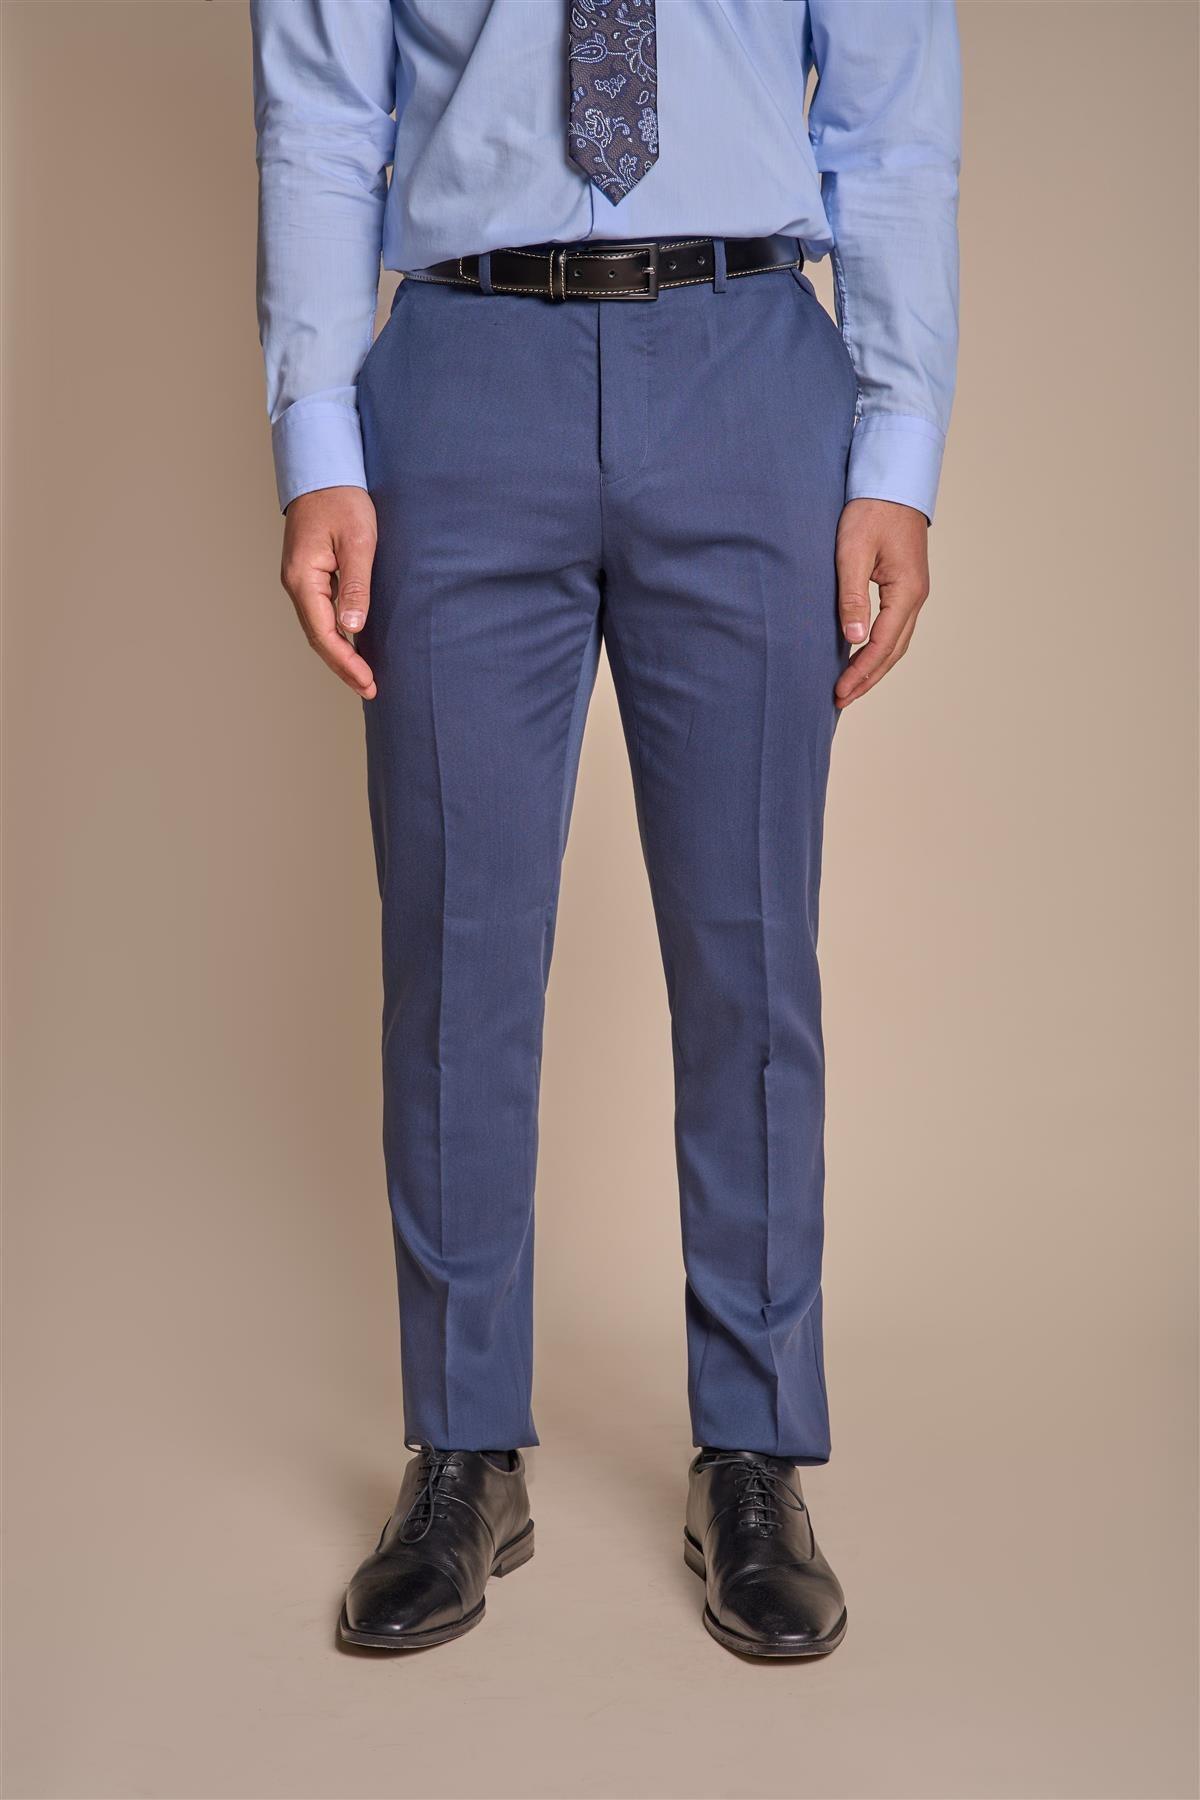 Specter Teal Trousers Front